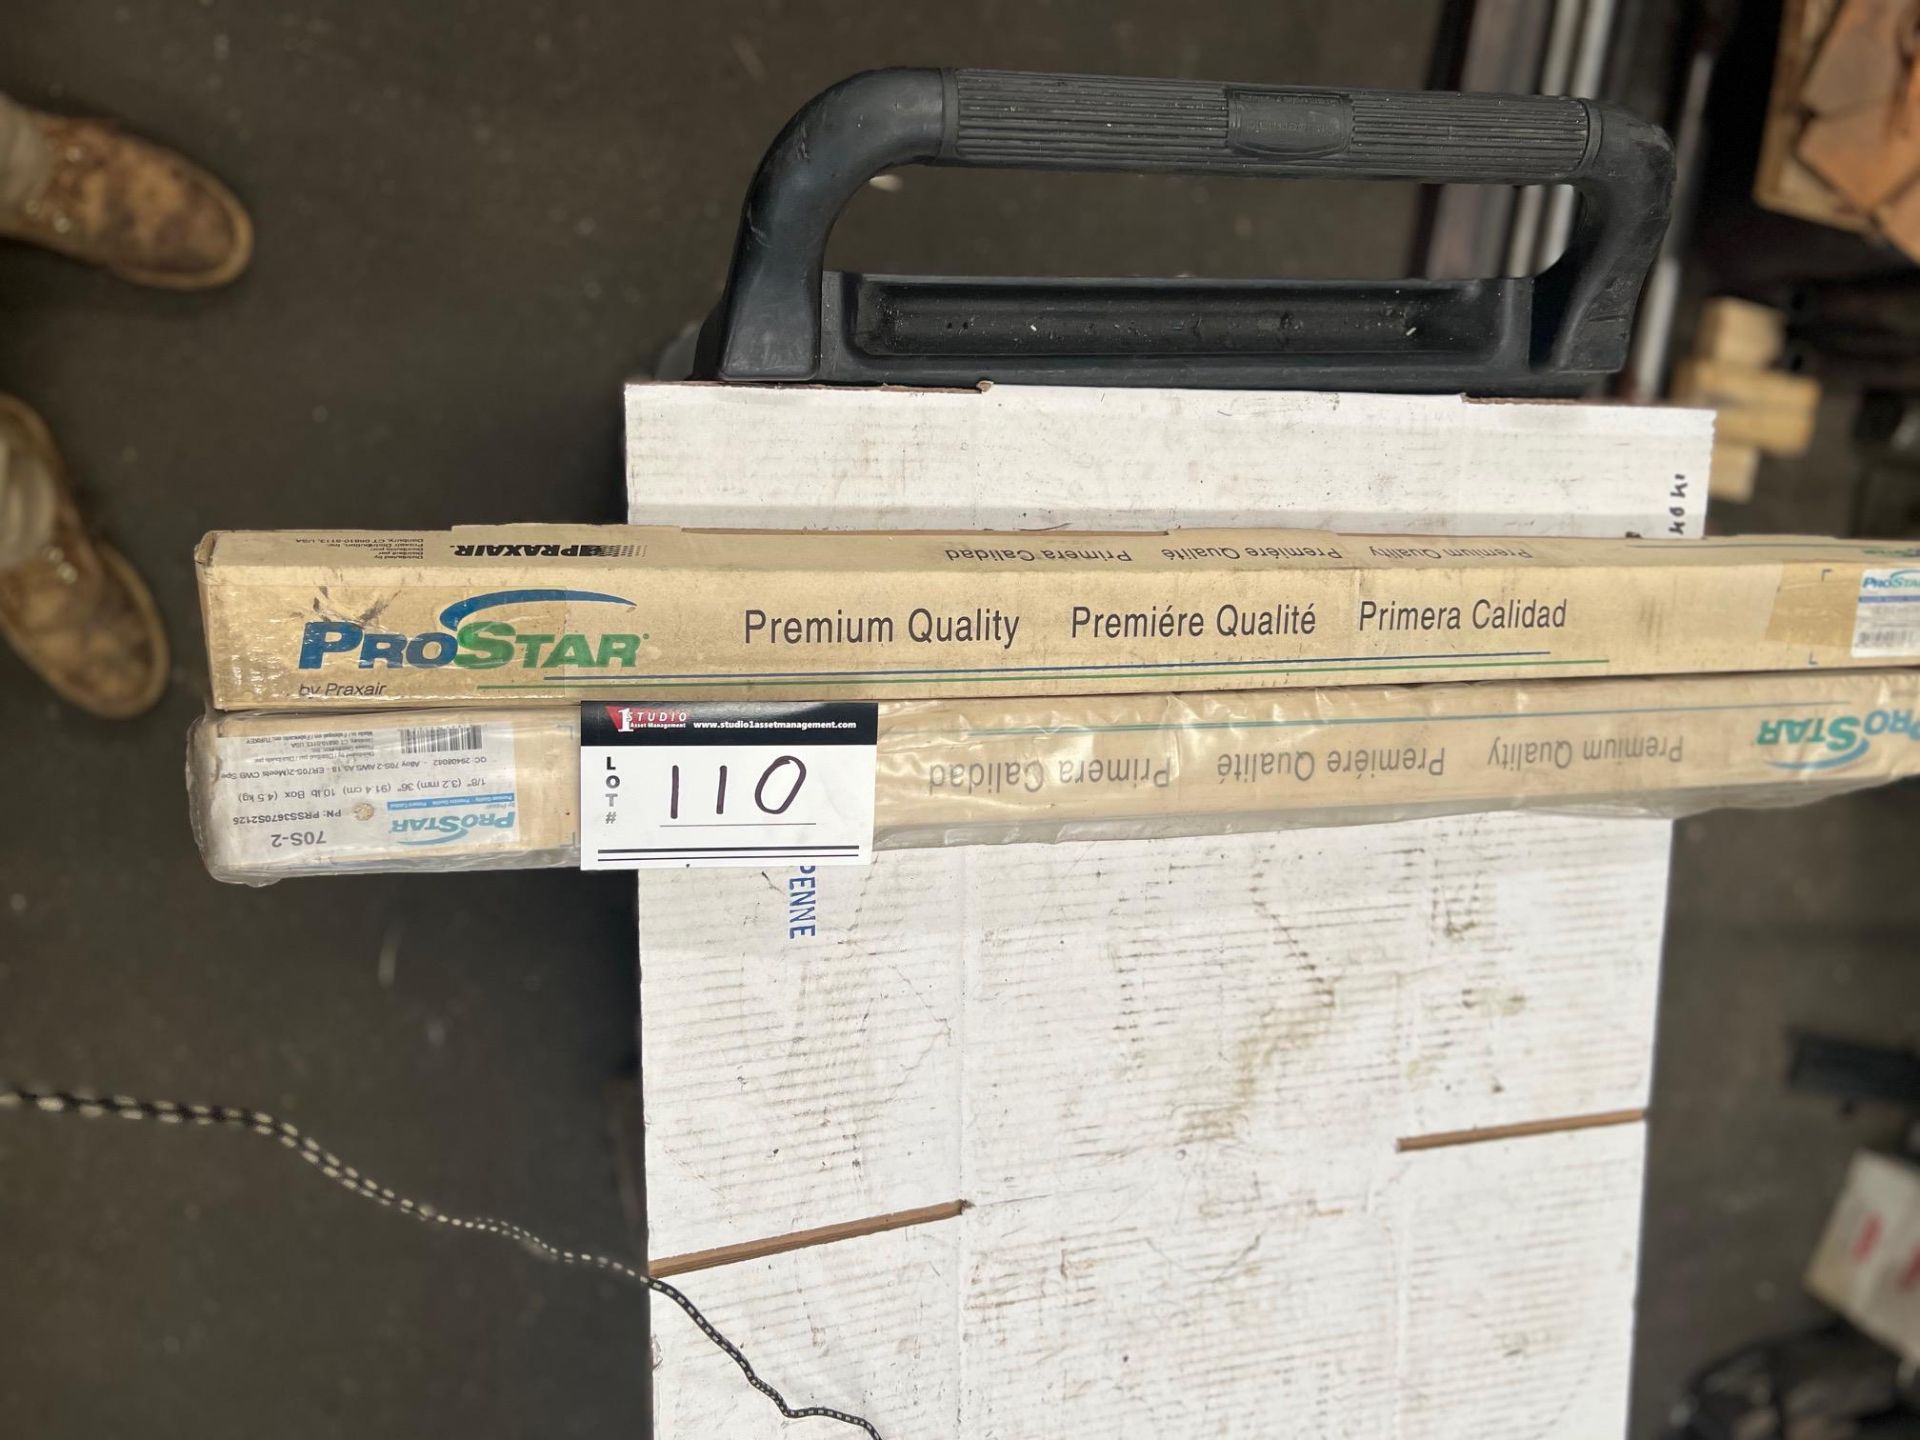 LOT/PROSTAR PREMIUM QUALITY COATED WELDING RODS, QTY 2 BOXES - Image 2 of 3